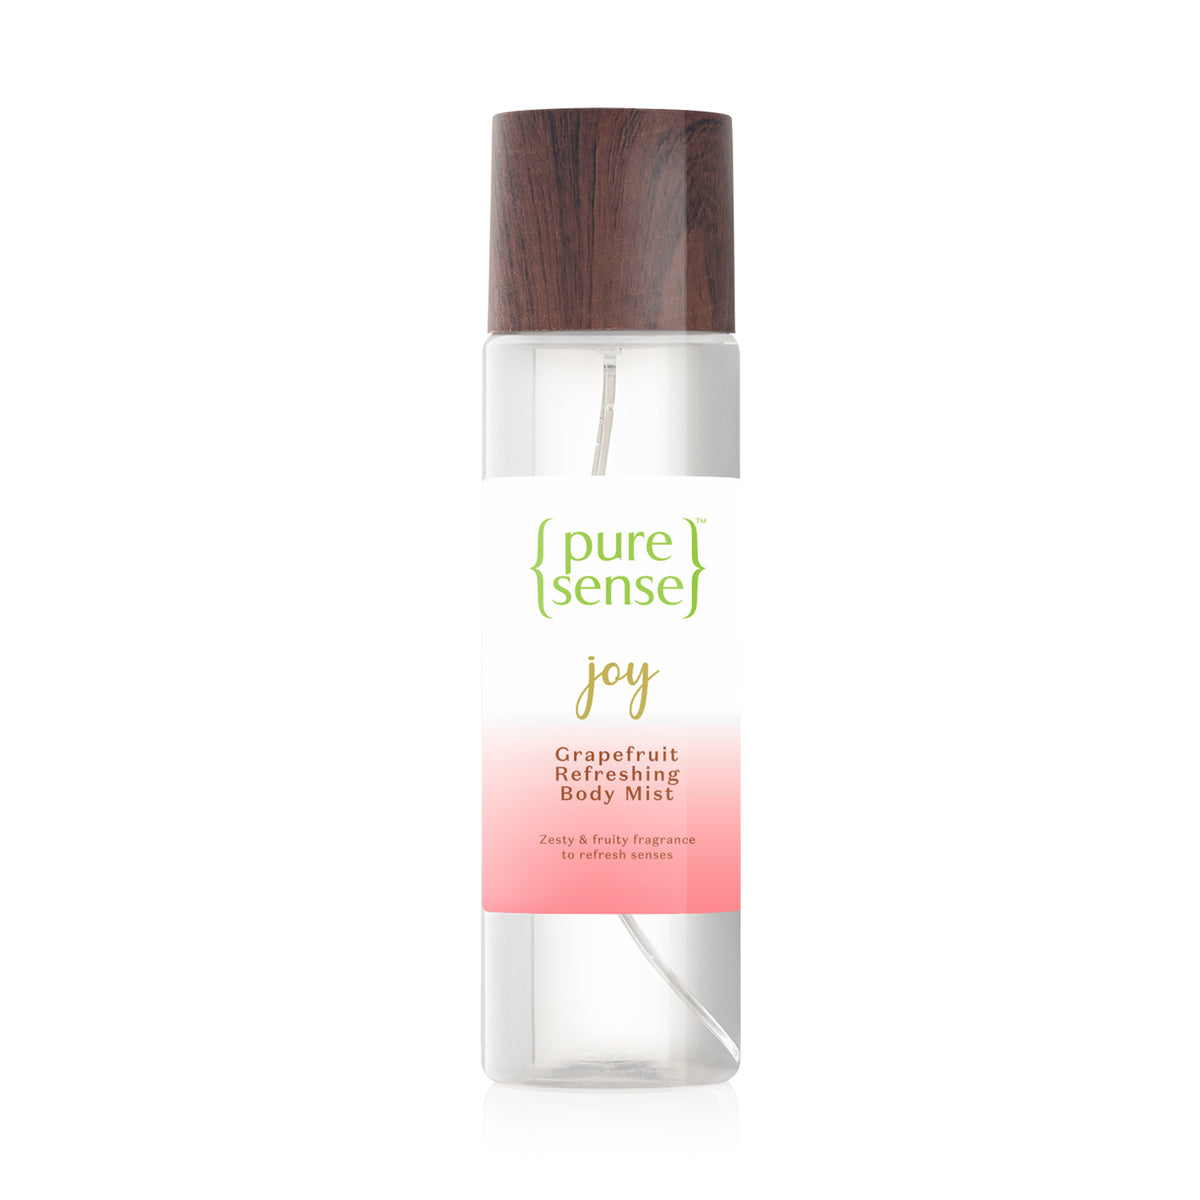 [CRED] Joy Grapefruit Refreshing Body Mist | From the makers of Parachute Advansed | 150 ml - PureSense